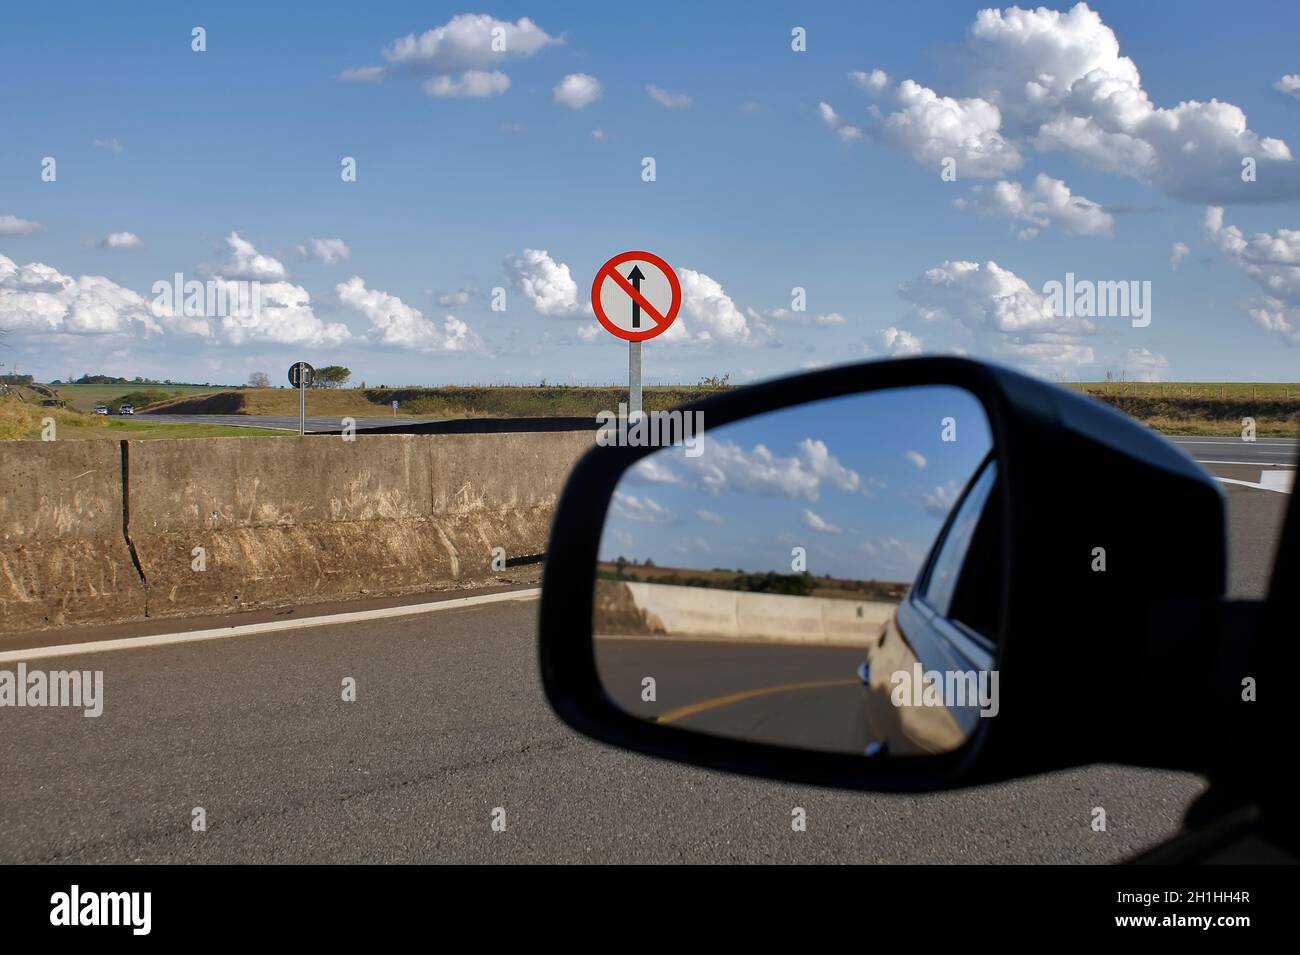 Prohibited sign to go straight ahead, on a return from a highway in São Paulo, Brazil. Stock Photo